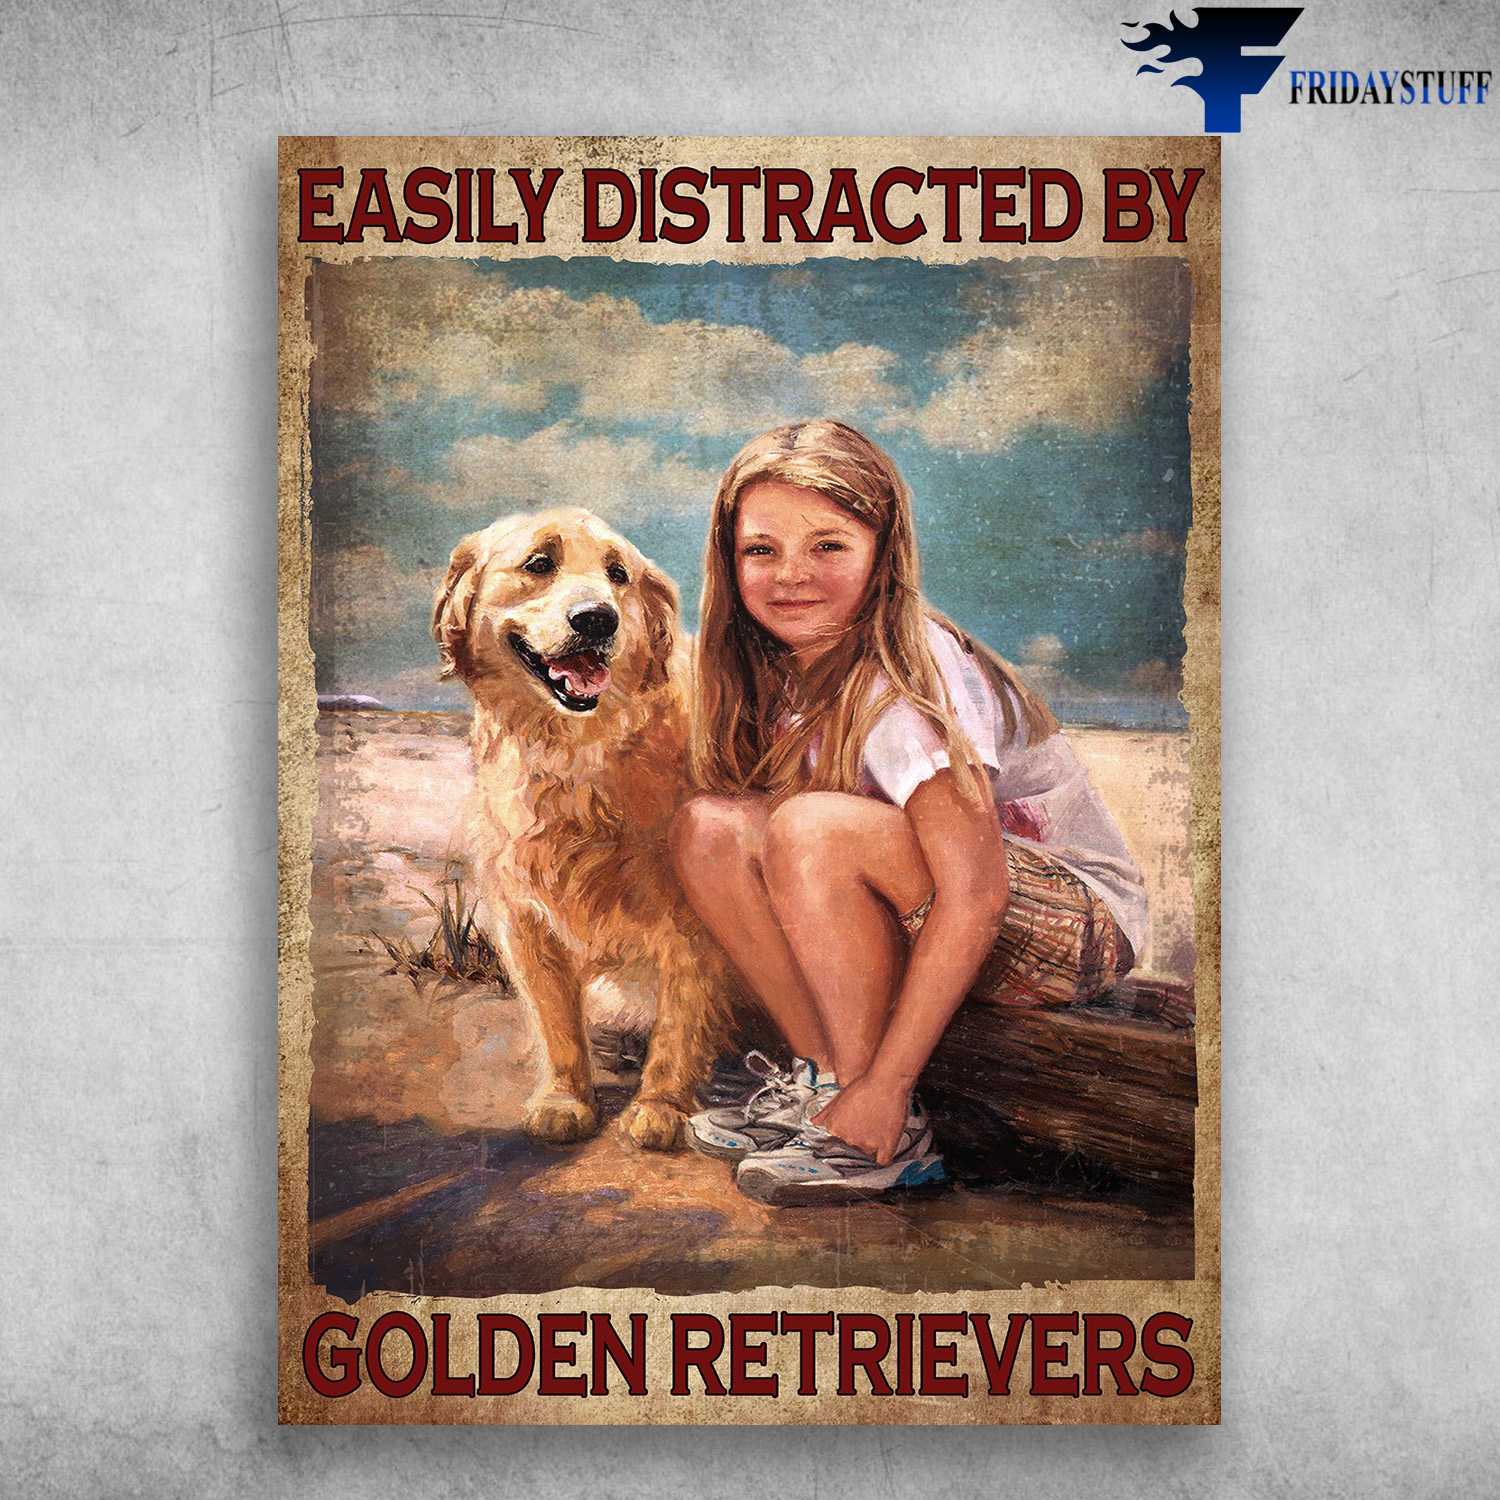 Golden Retriever And Girl, Dog Lover - Easily Distracted By, Golden Retrievers